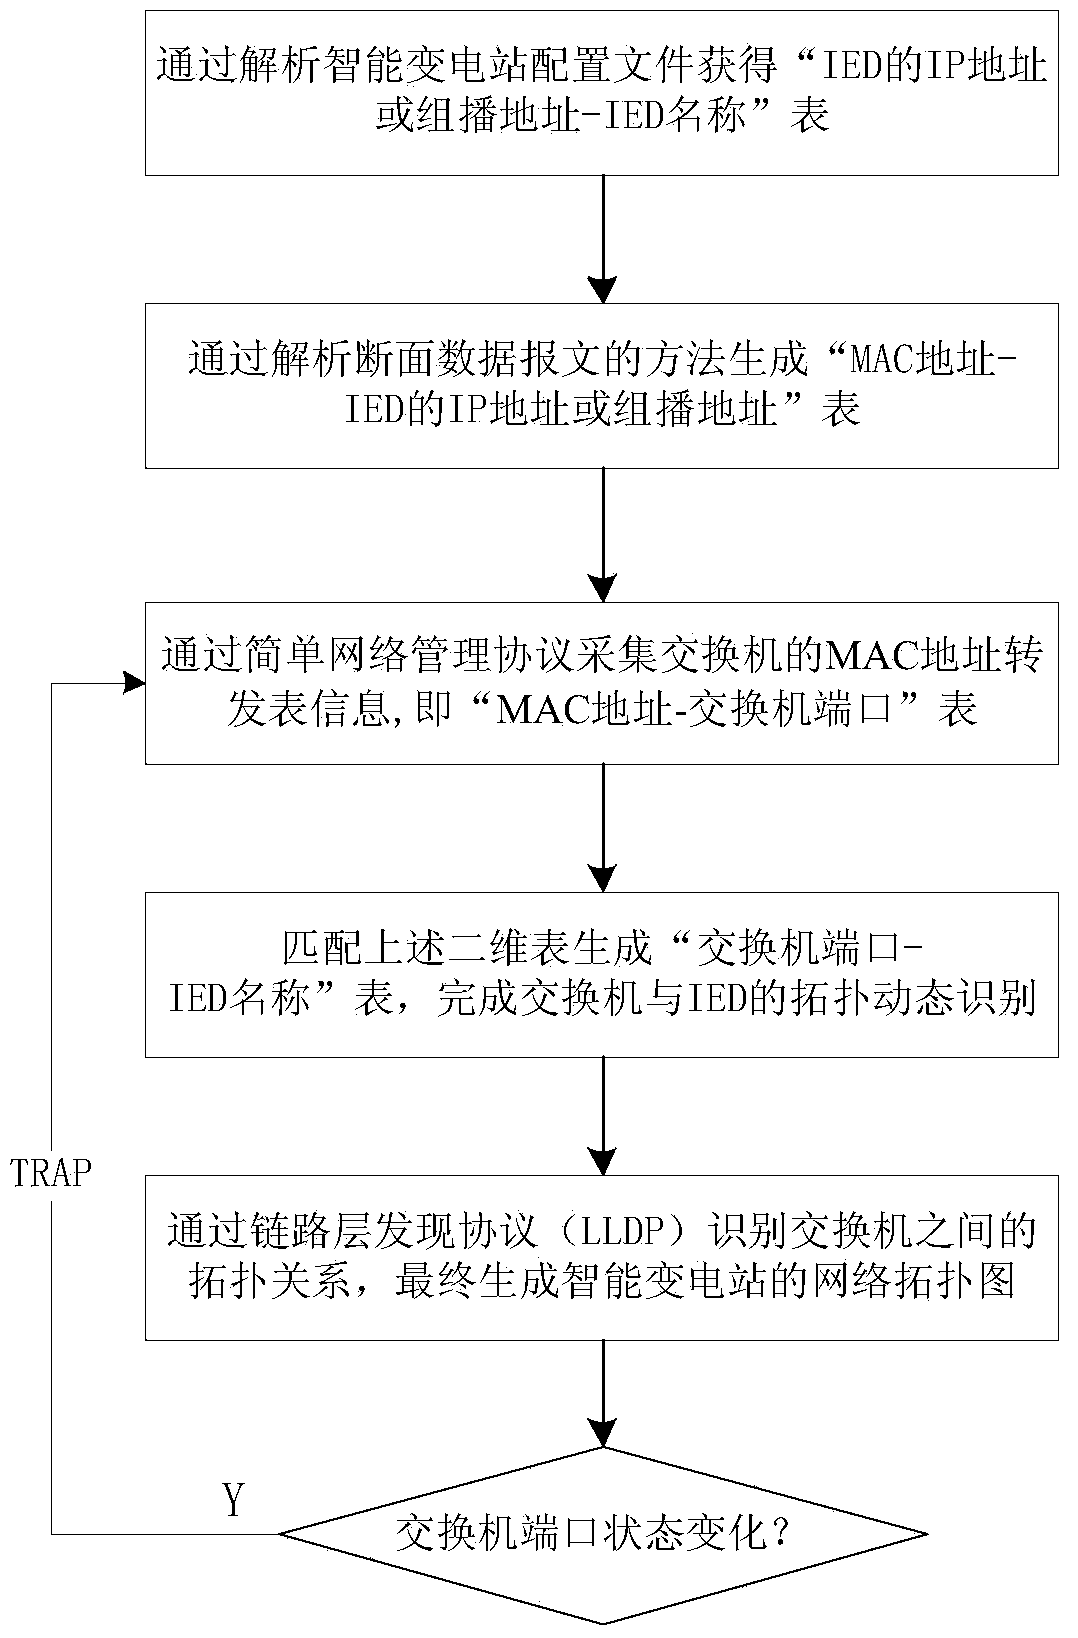 Dynamic recognition method for intelligent substation network device topology based on MAC address matching